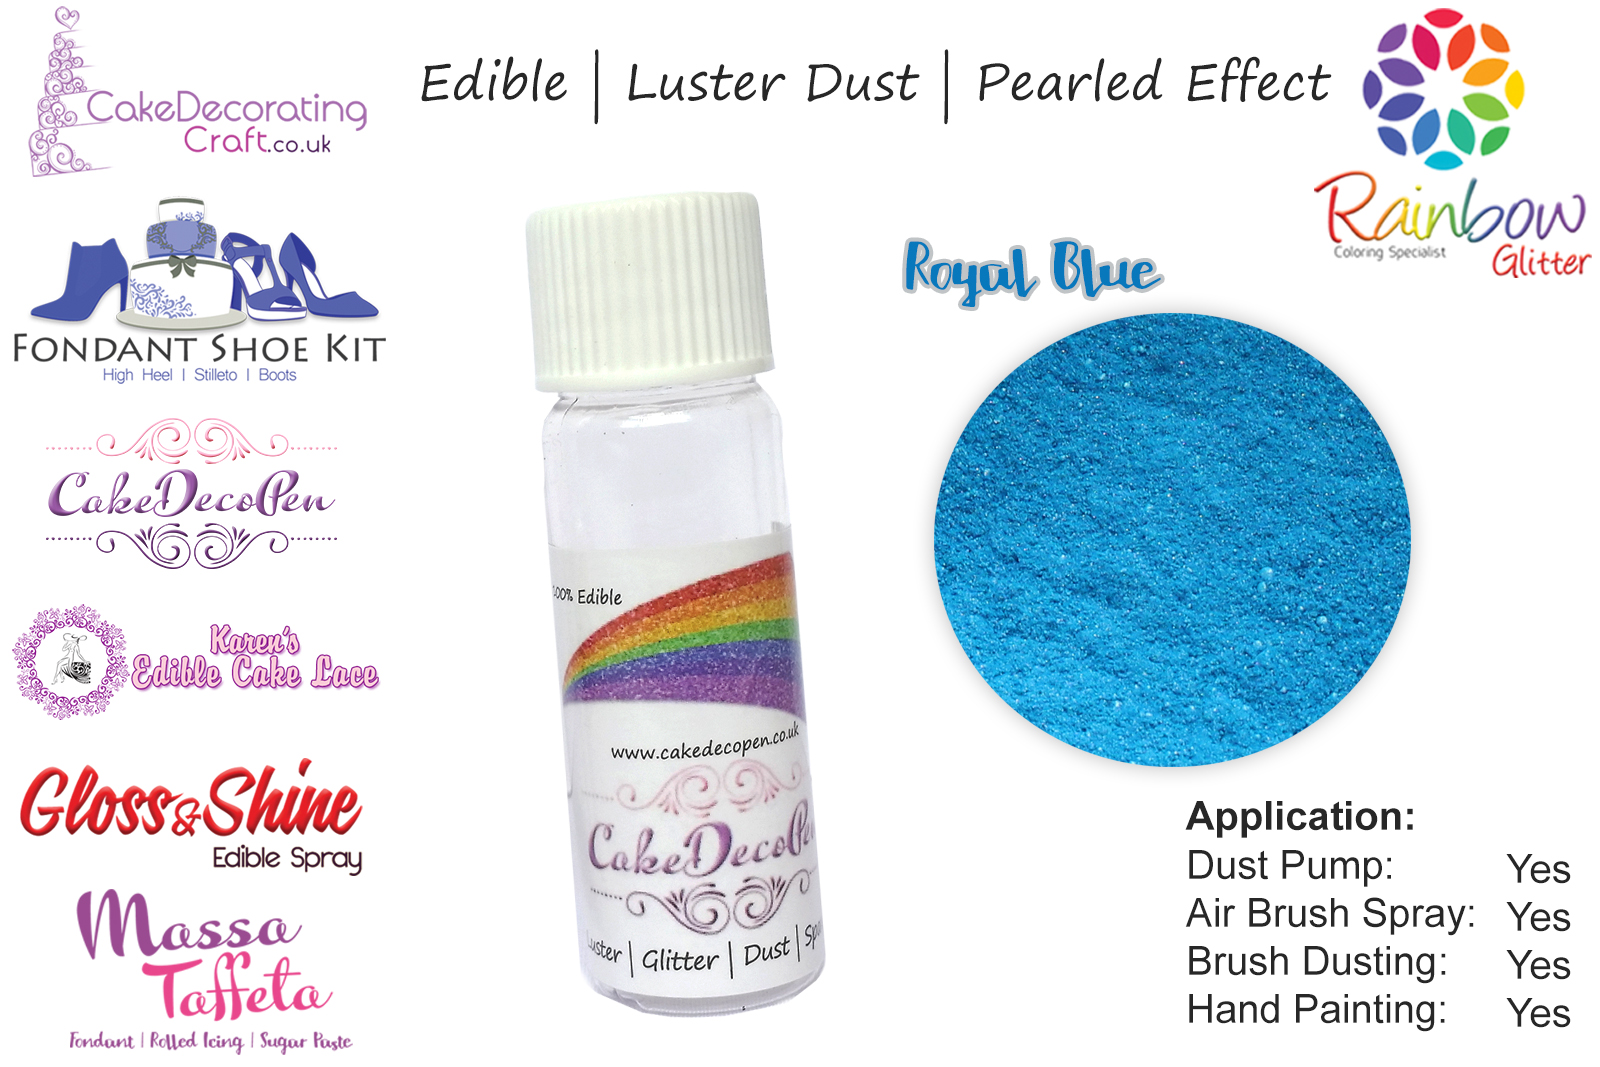 Royal Blue | Pearled | Luster | Shimmer | Gloss | Edible Dust | 25 Gram Pot | Cake Decorating Craft